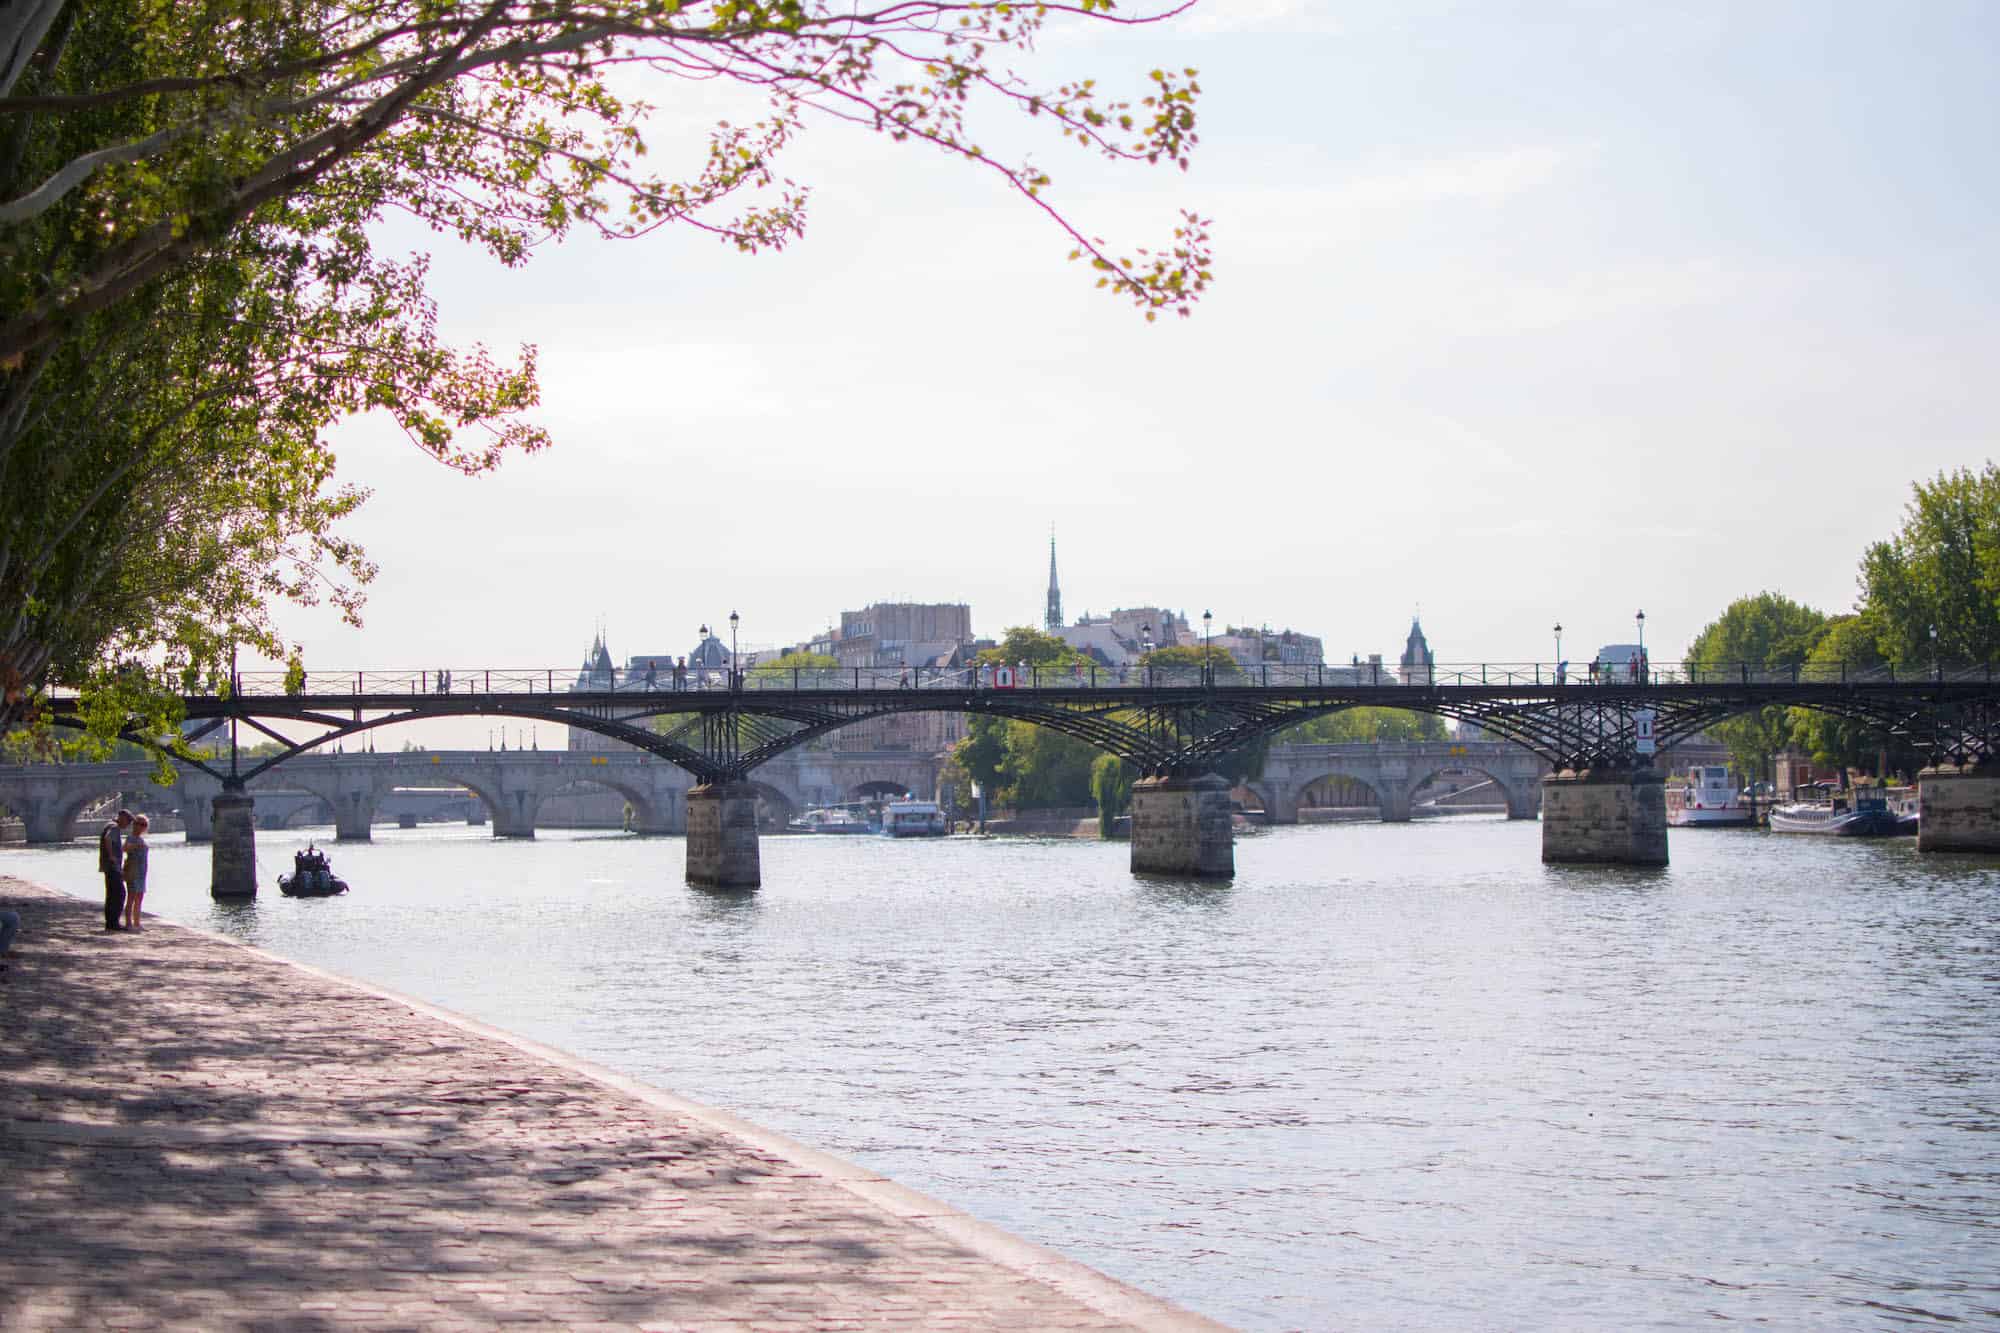 The Pont des Arts, a famed bridge in Paris, mainly known for where where the love lock trend started, with Notre Dame's spire peeking out from behind.